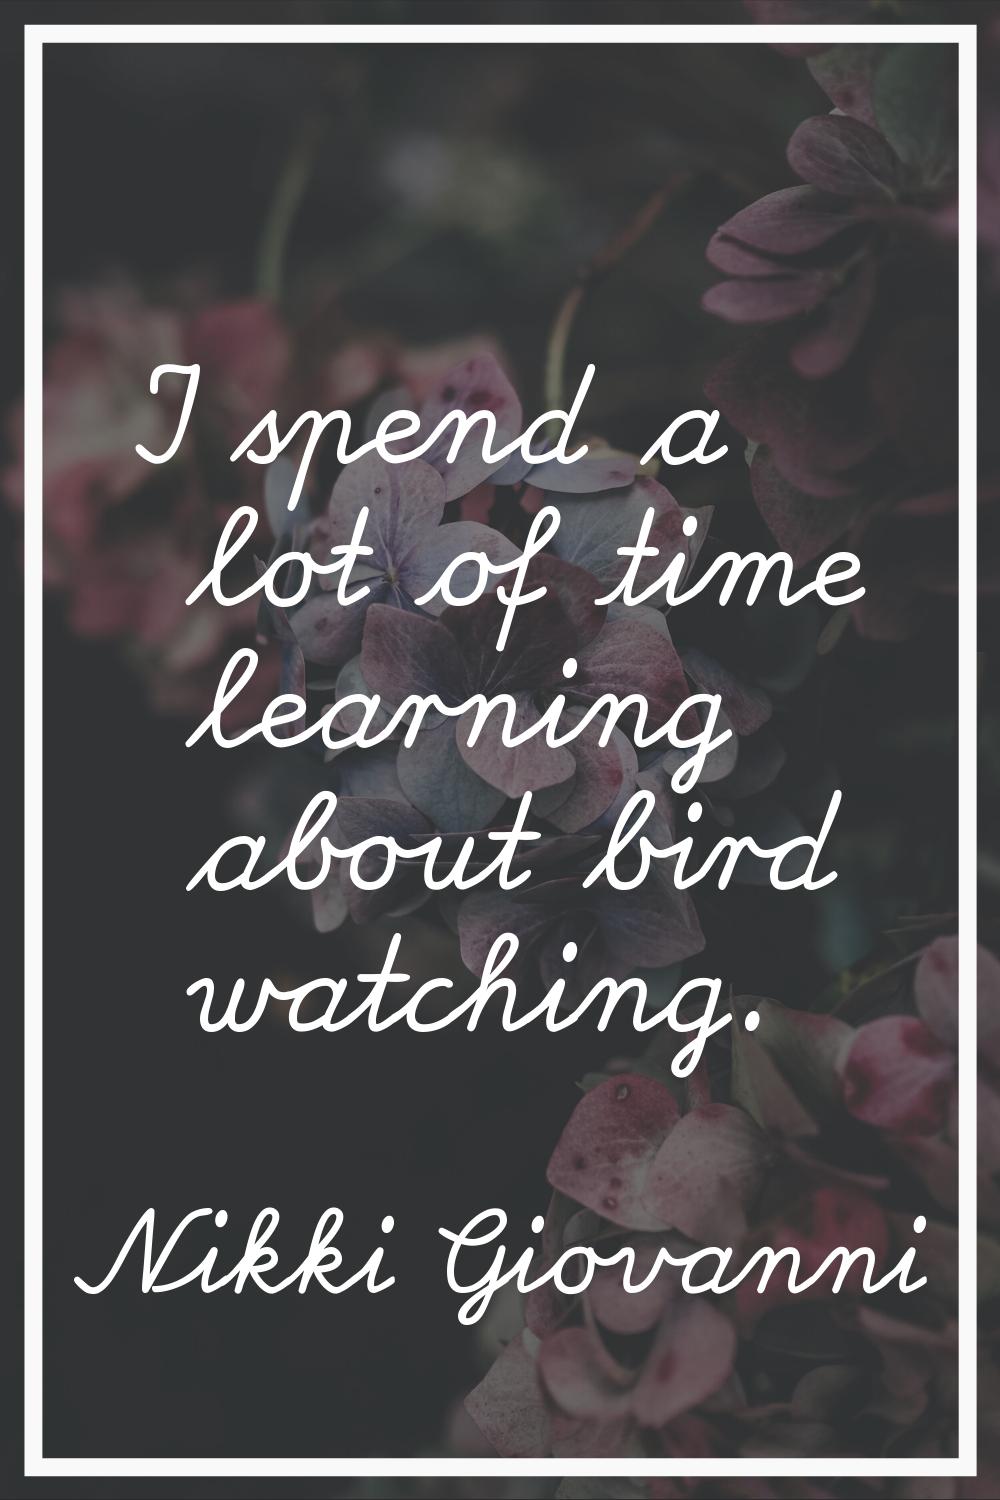 I spend a lot of time learning about bird watching.